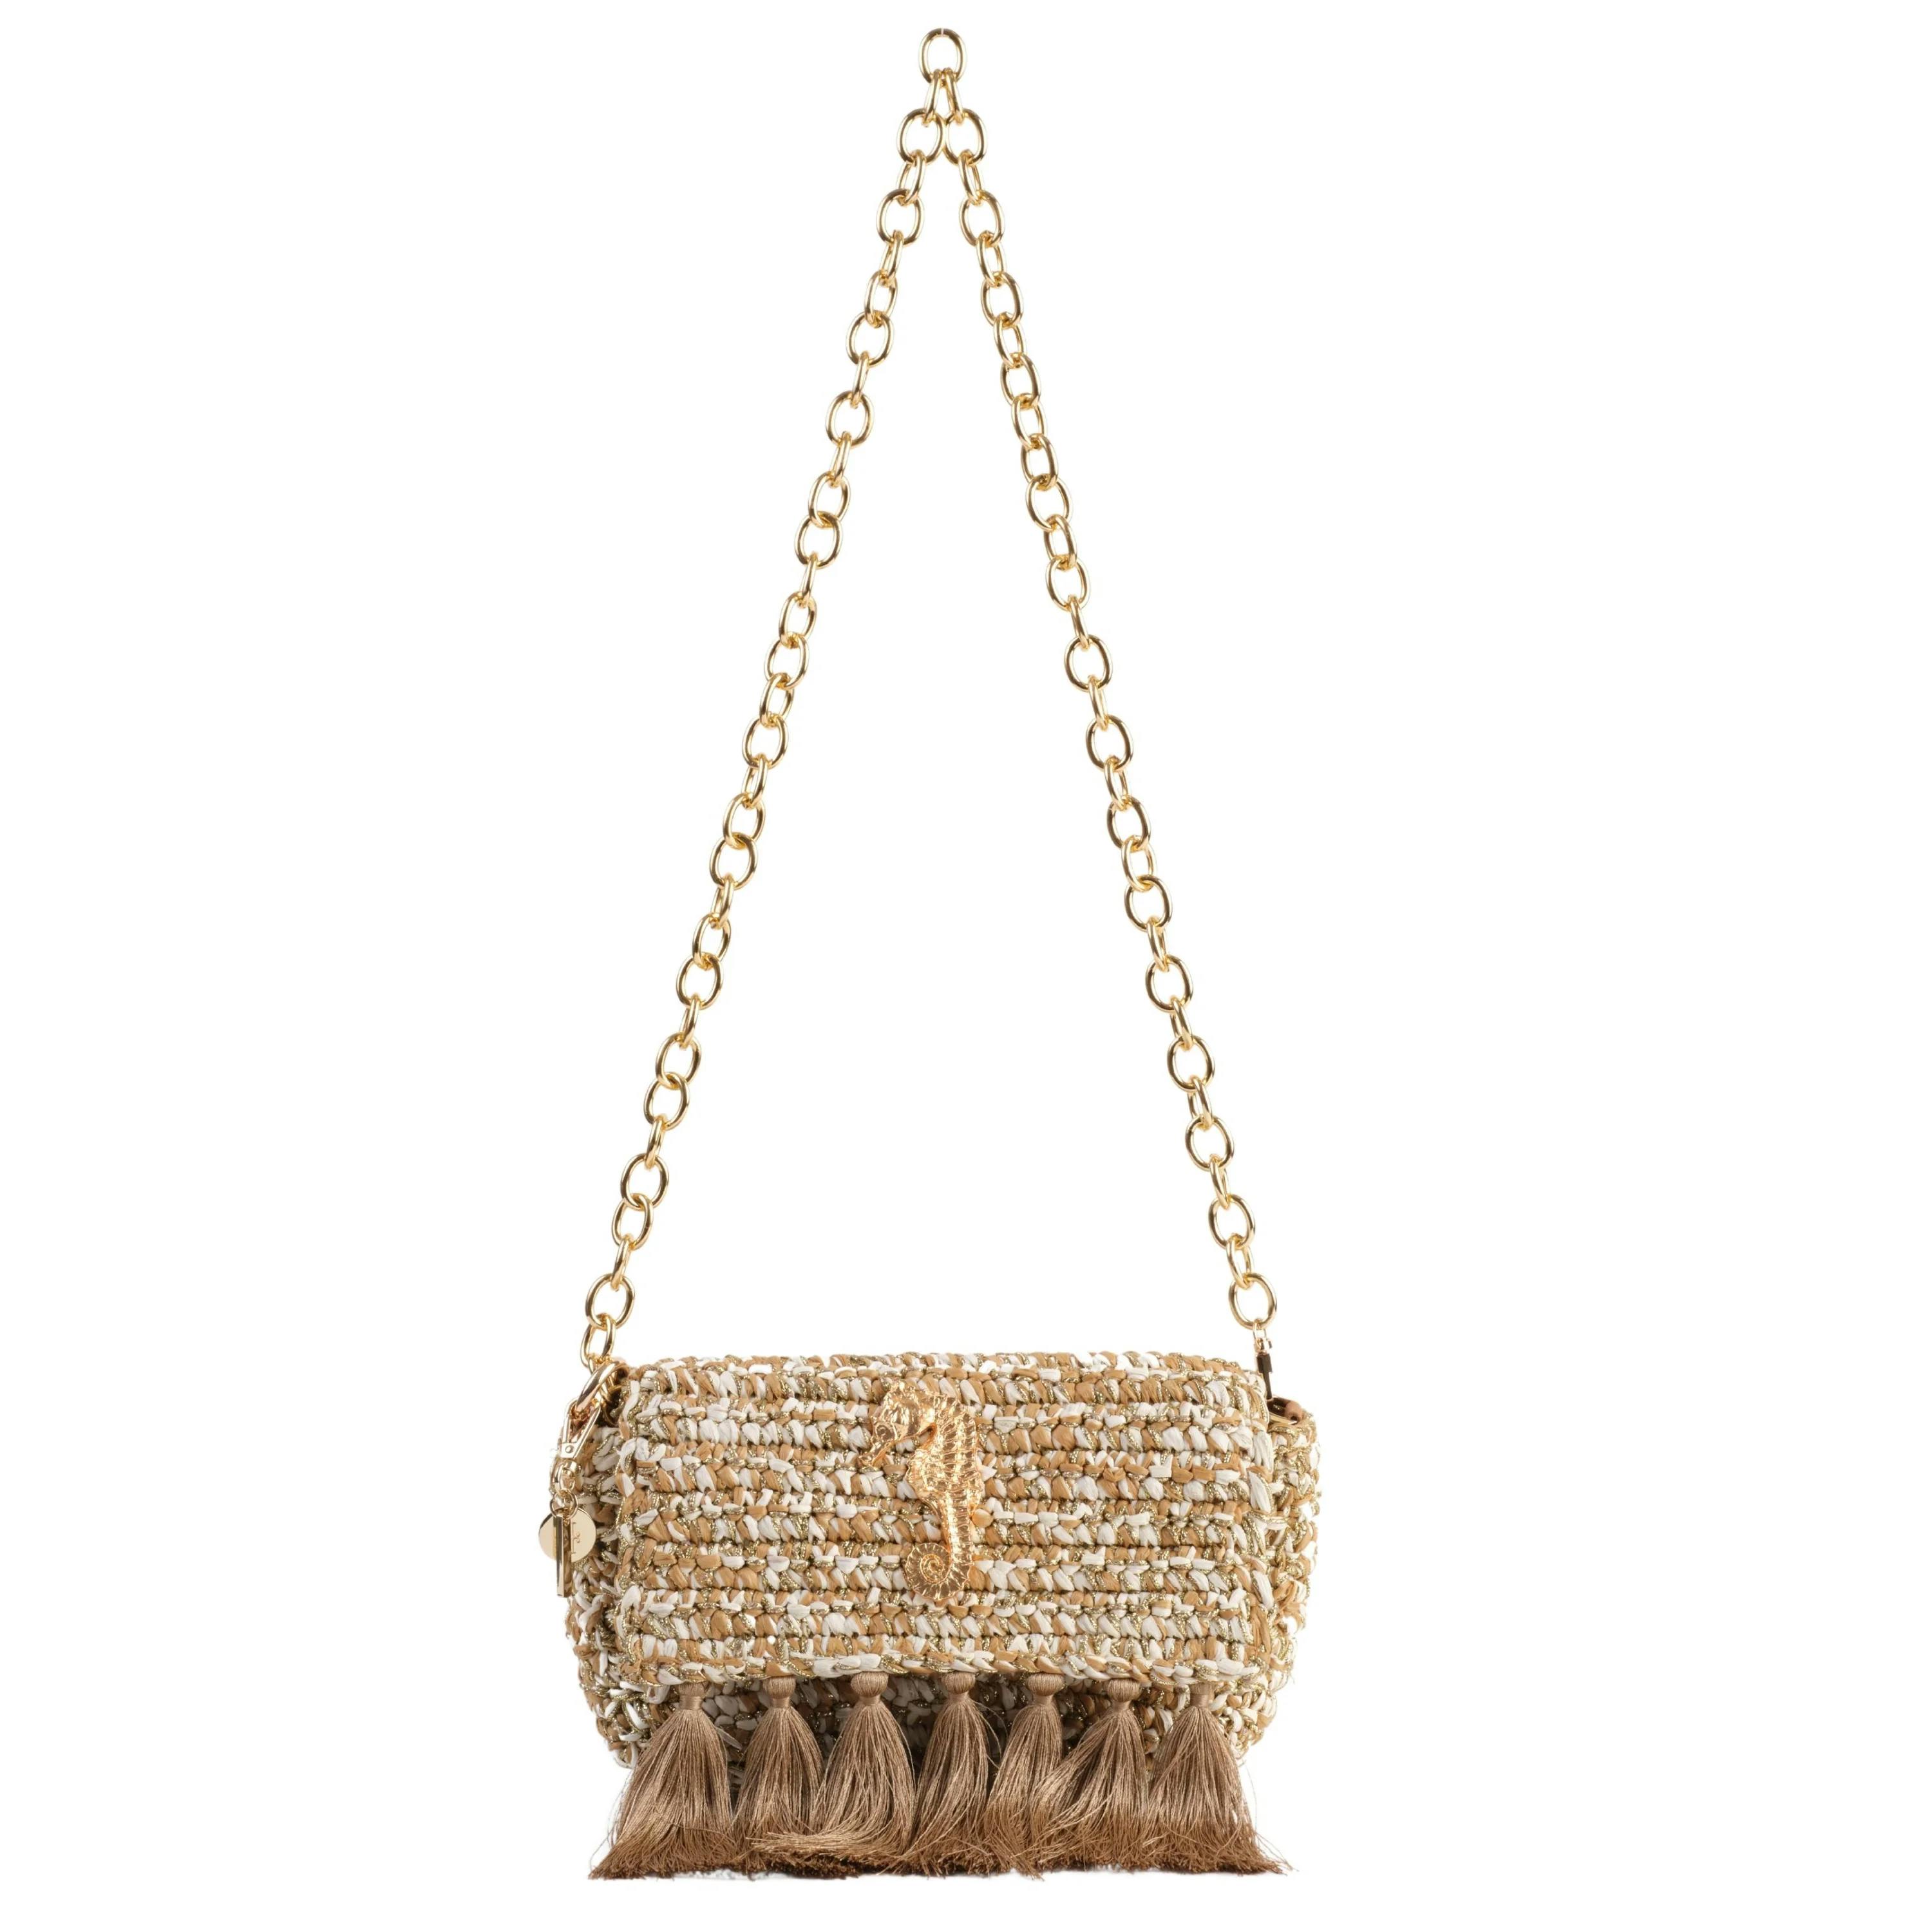 4 Weave Real Raffia Clutch, a product by JENA